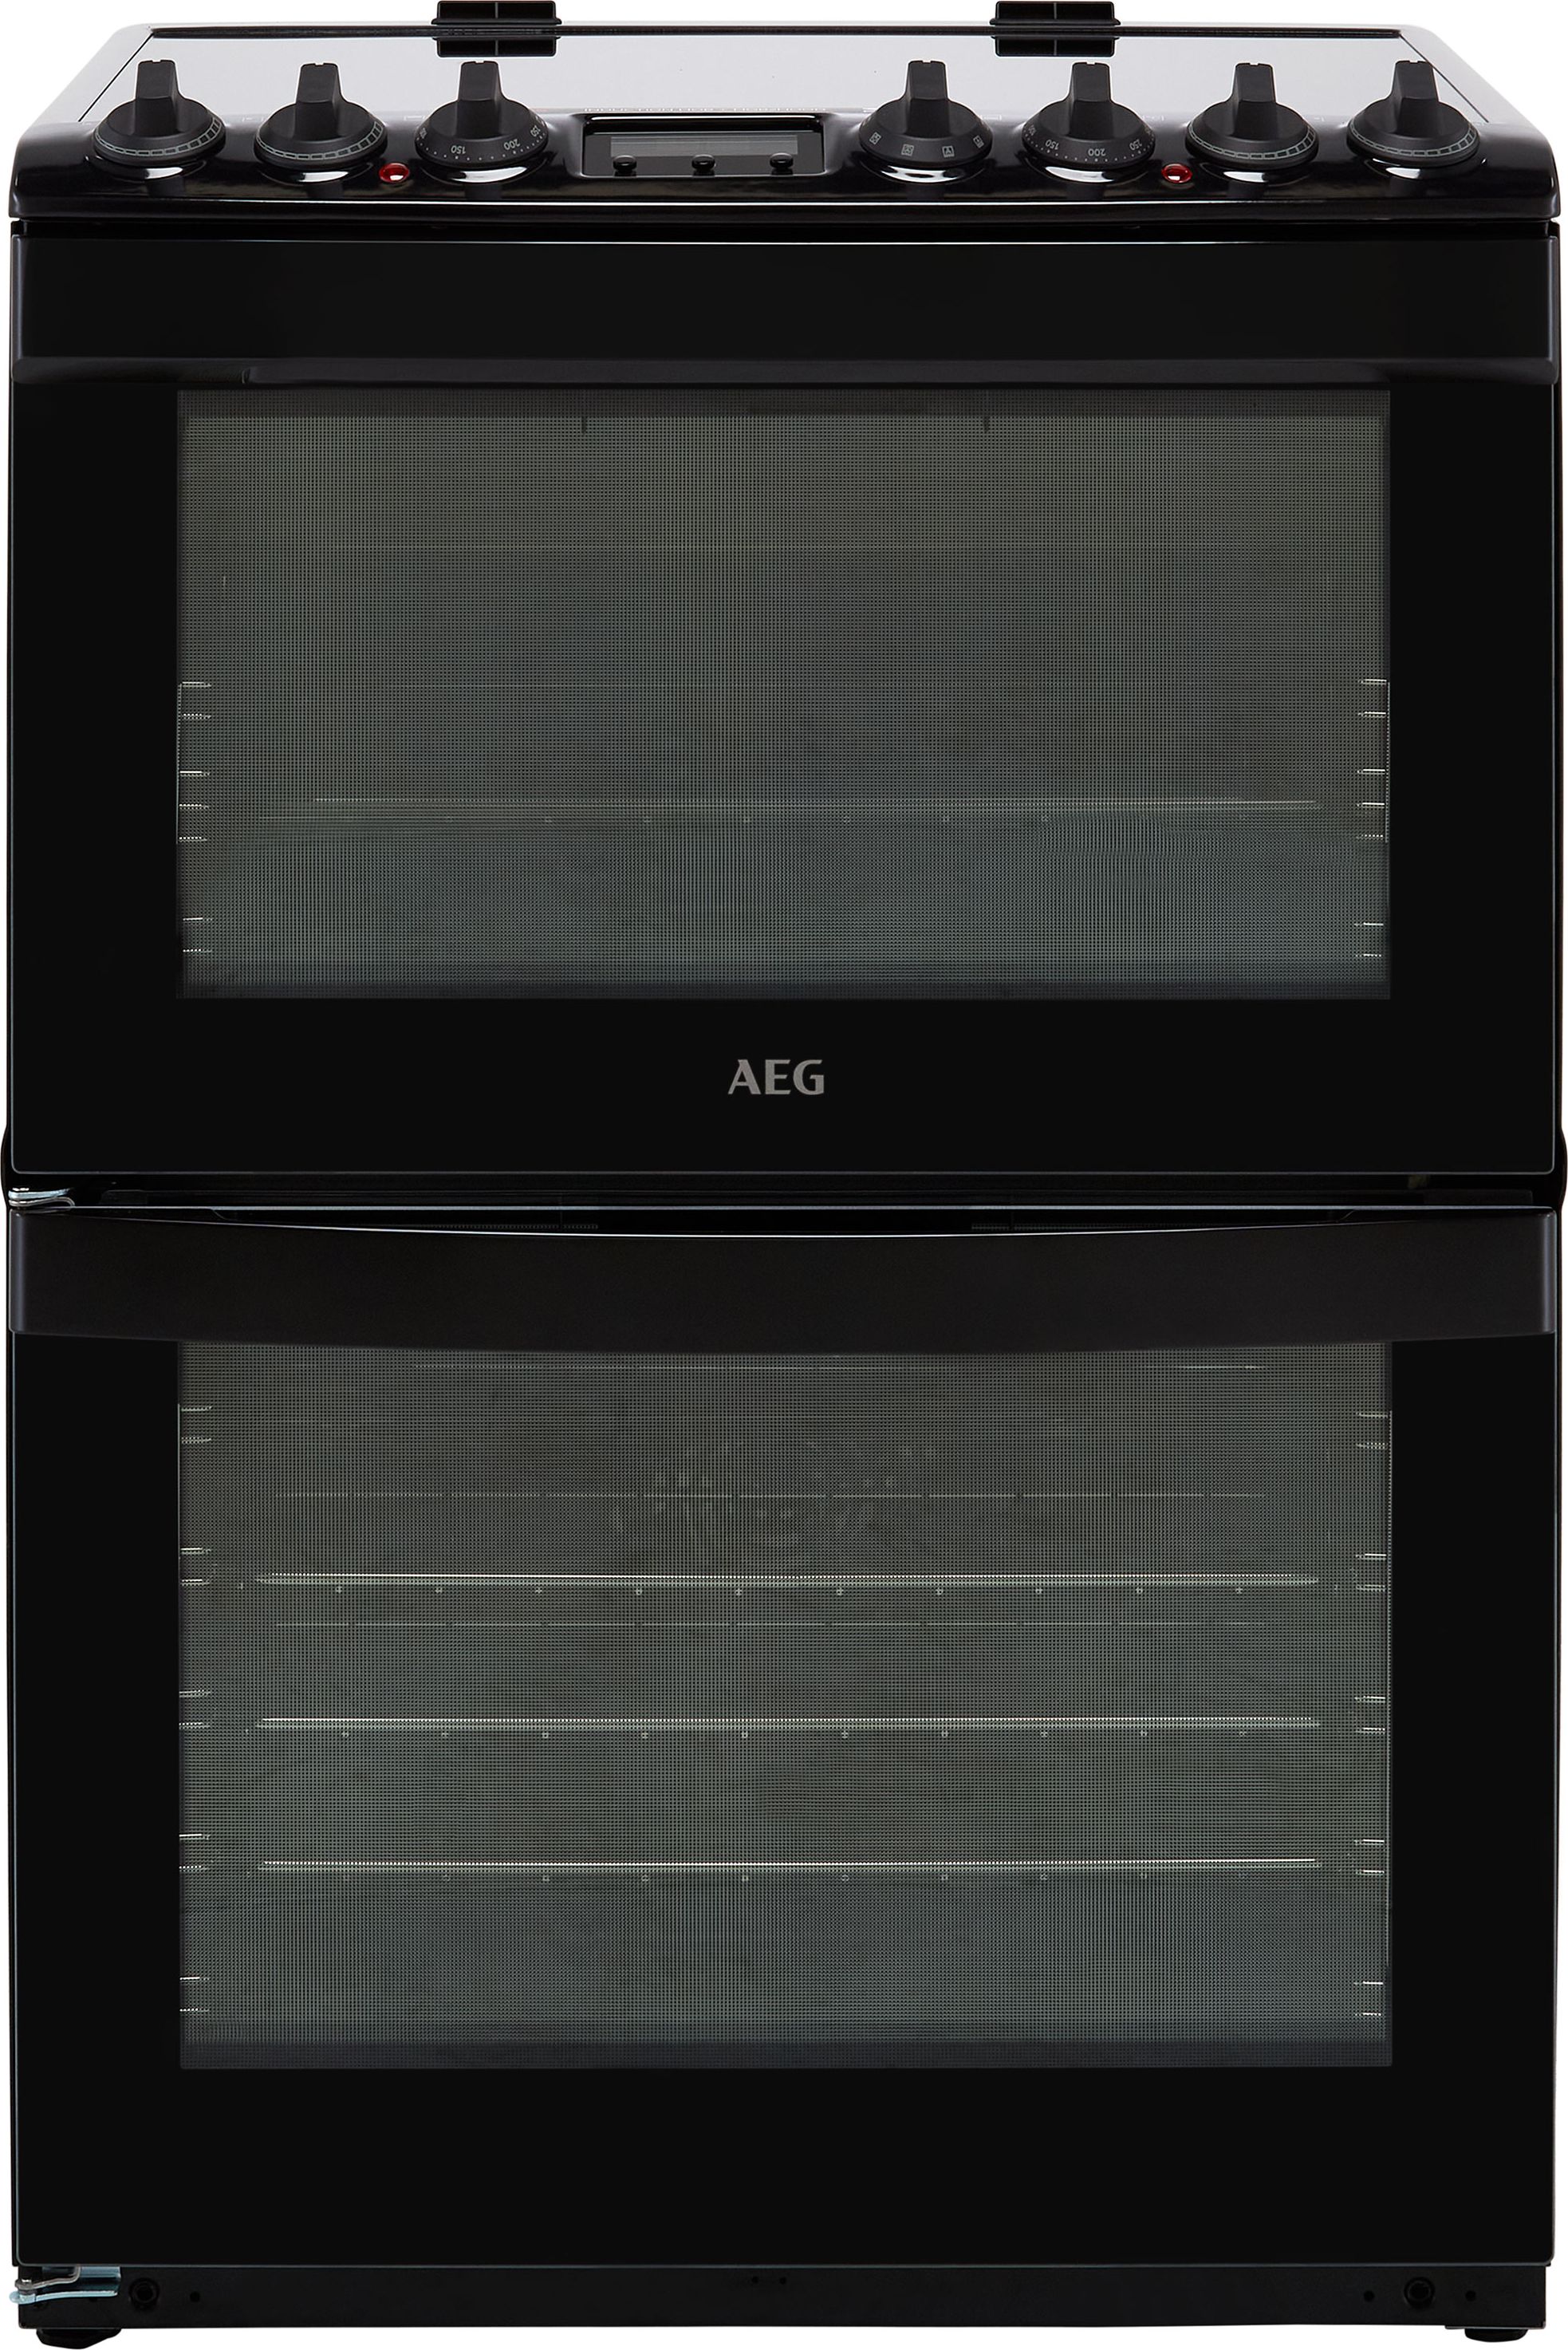 AEG CIB6742ACB 60cm Electric Cooker with Induction Hob - Black - A/A Rated, Black